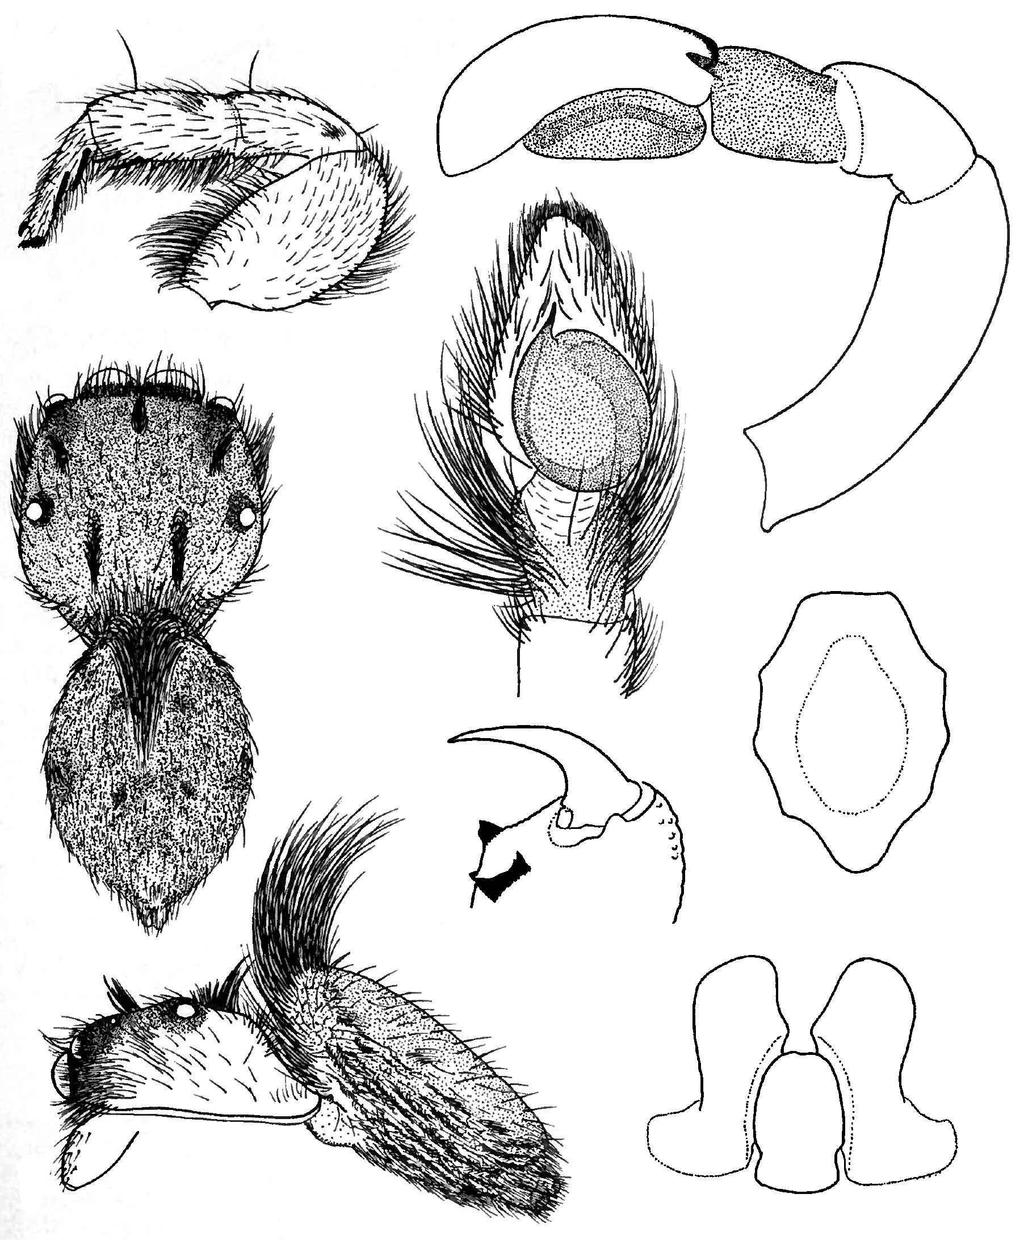 PHYACES 105 A F B D G E H C Fig. 1. Phyaces comosus Simon, from Badulla: A, leg I; B, dorsal; C, lateral; D, palp, ventral view; F, palp, retrolateral view.